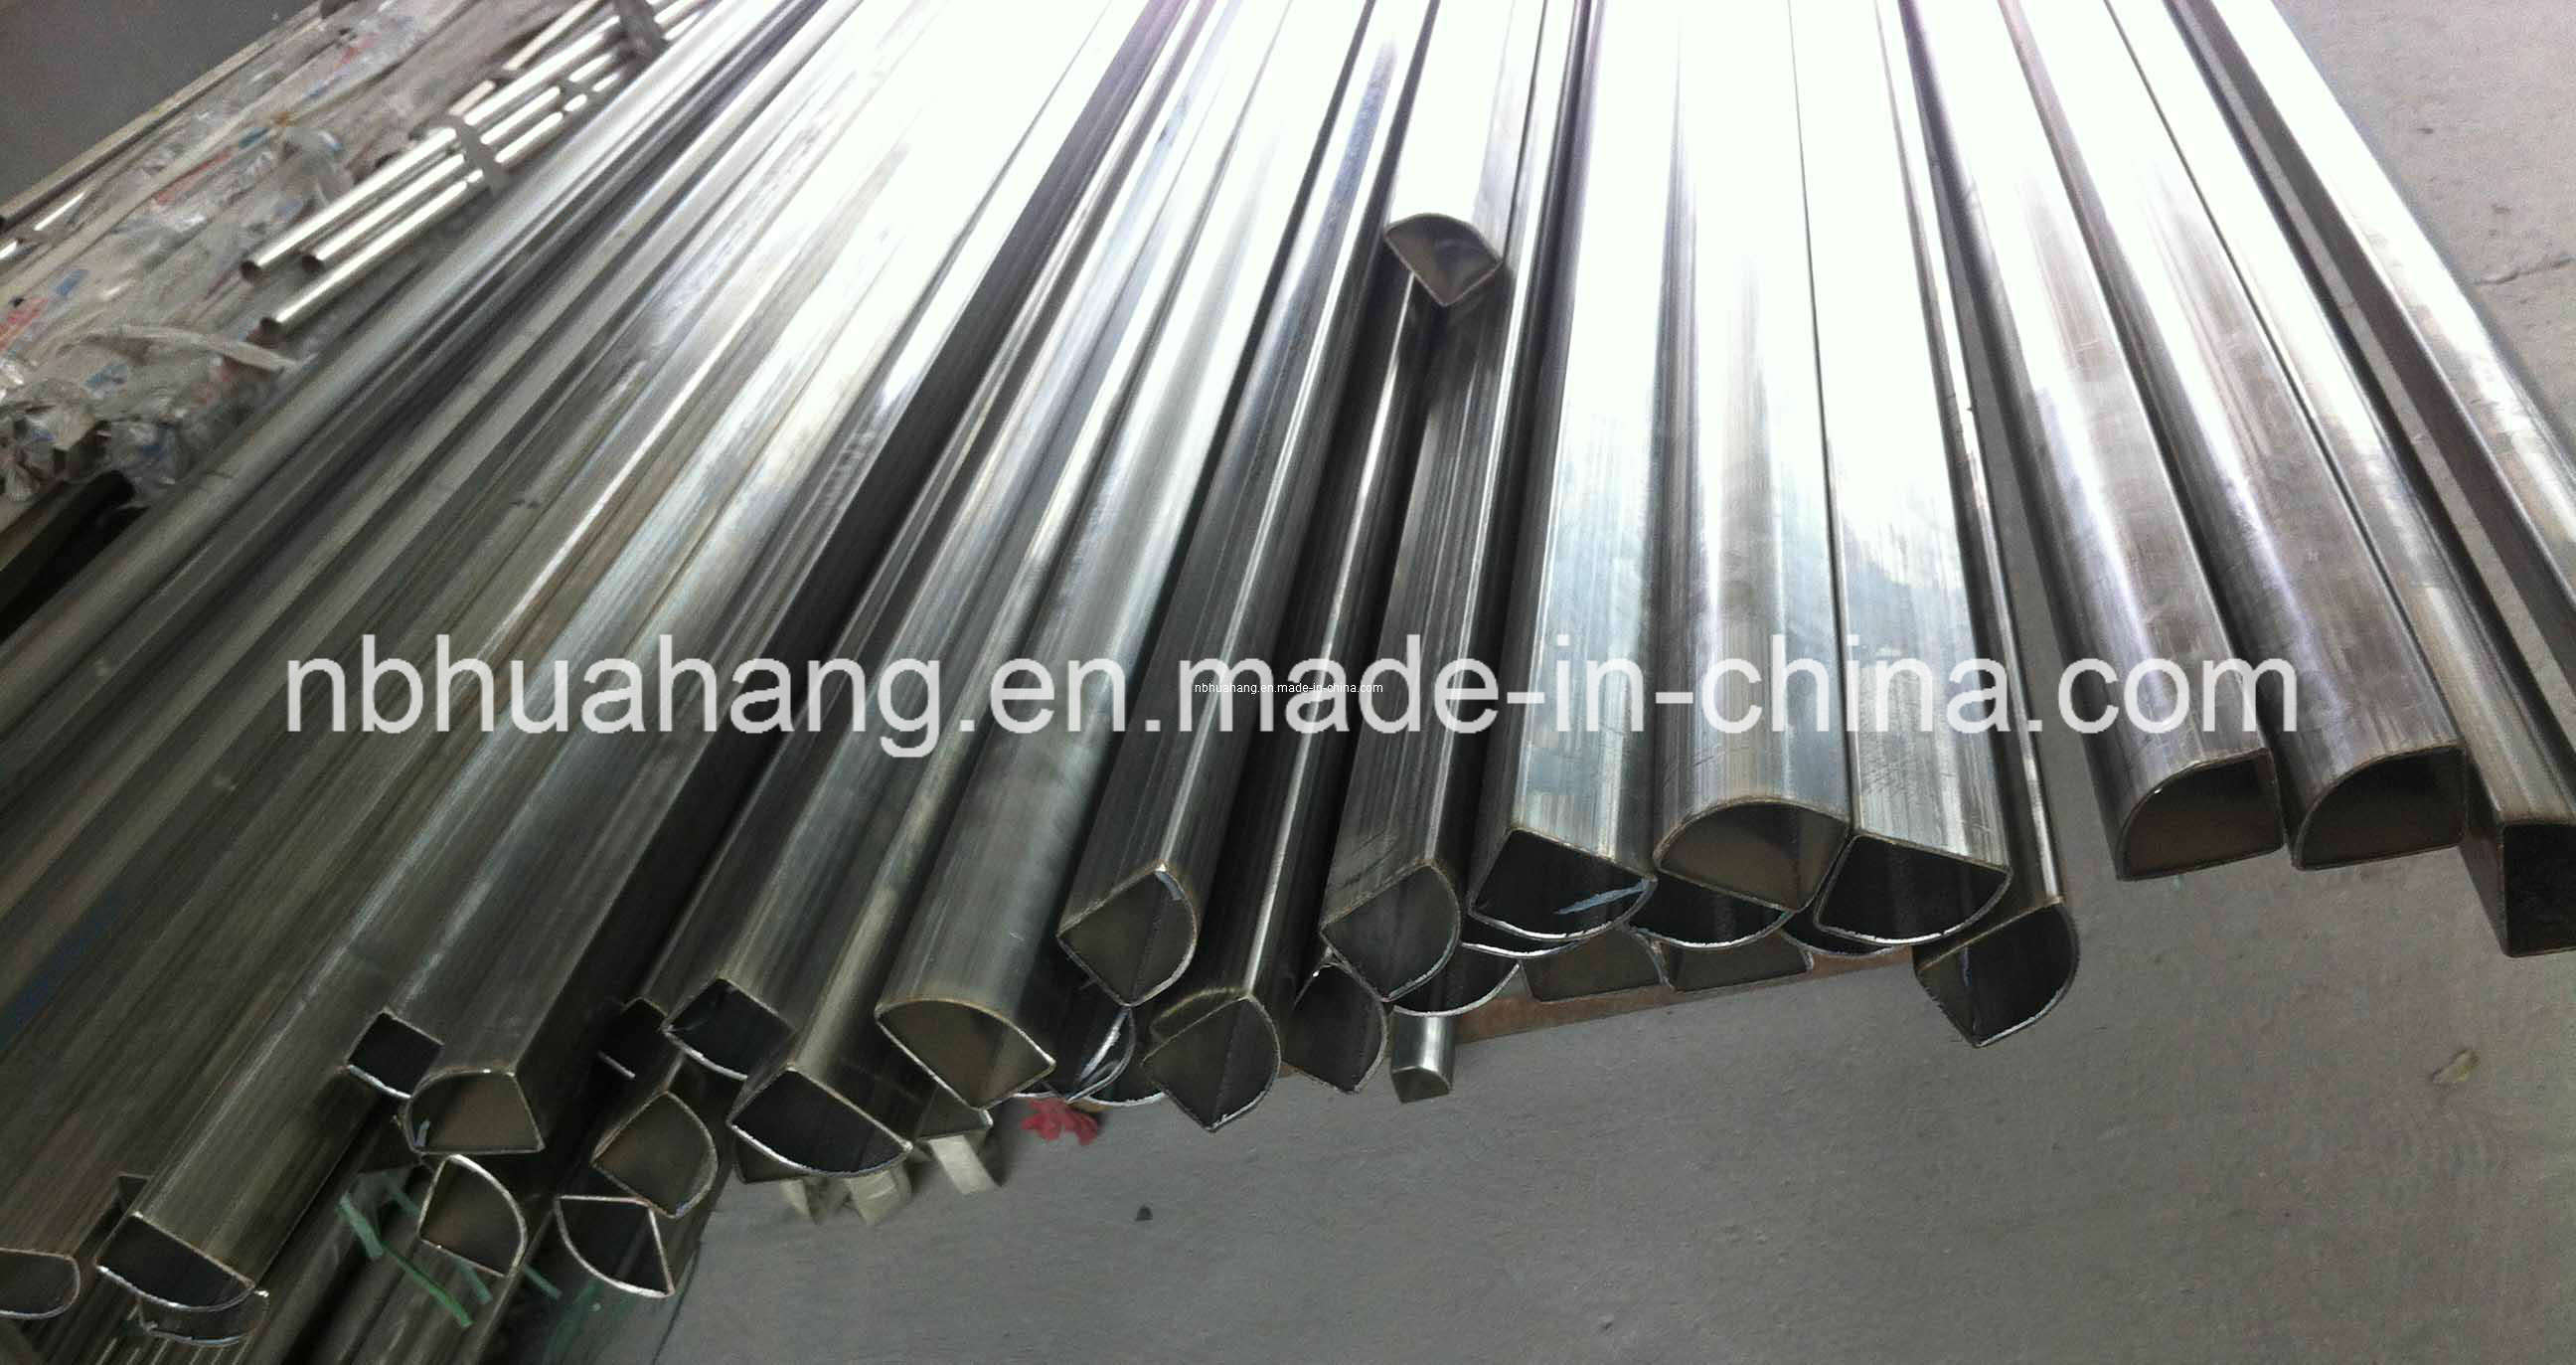 Special Shape Stainless Steel Pipes for Industry Use